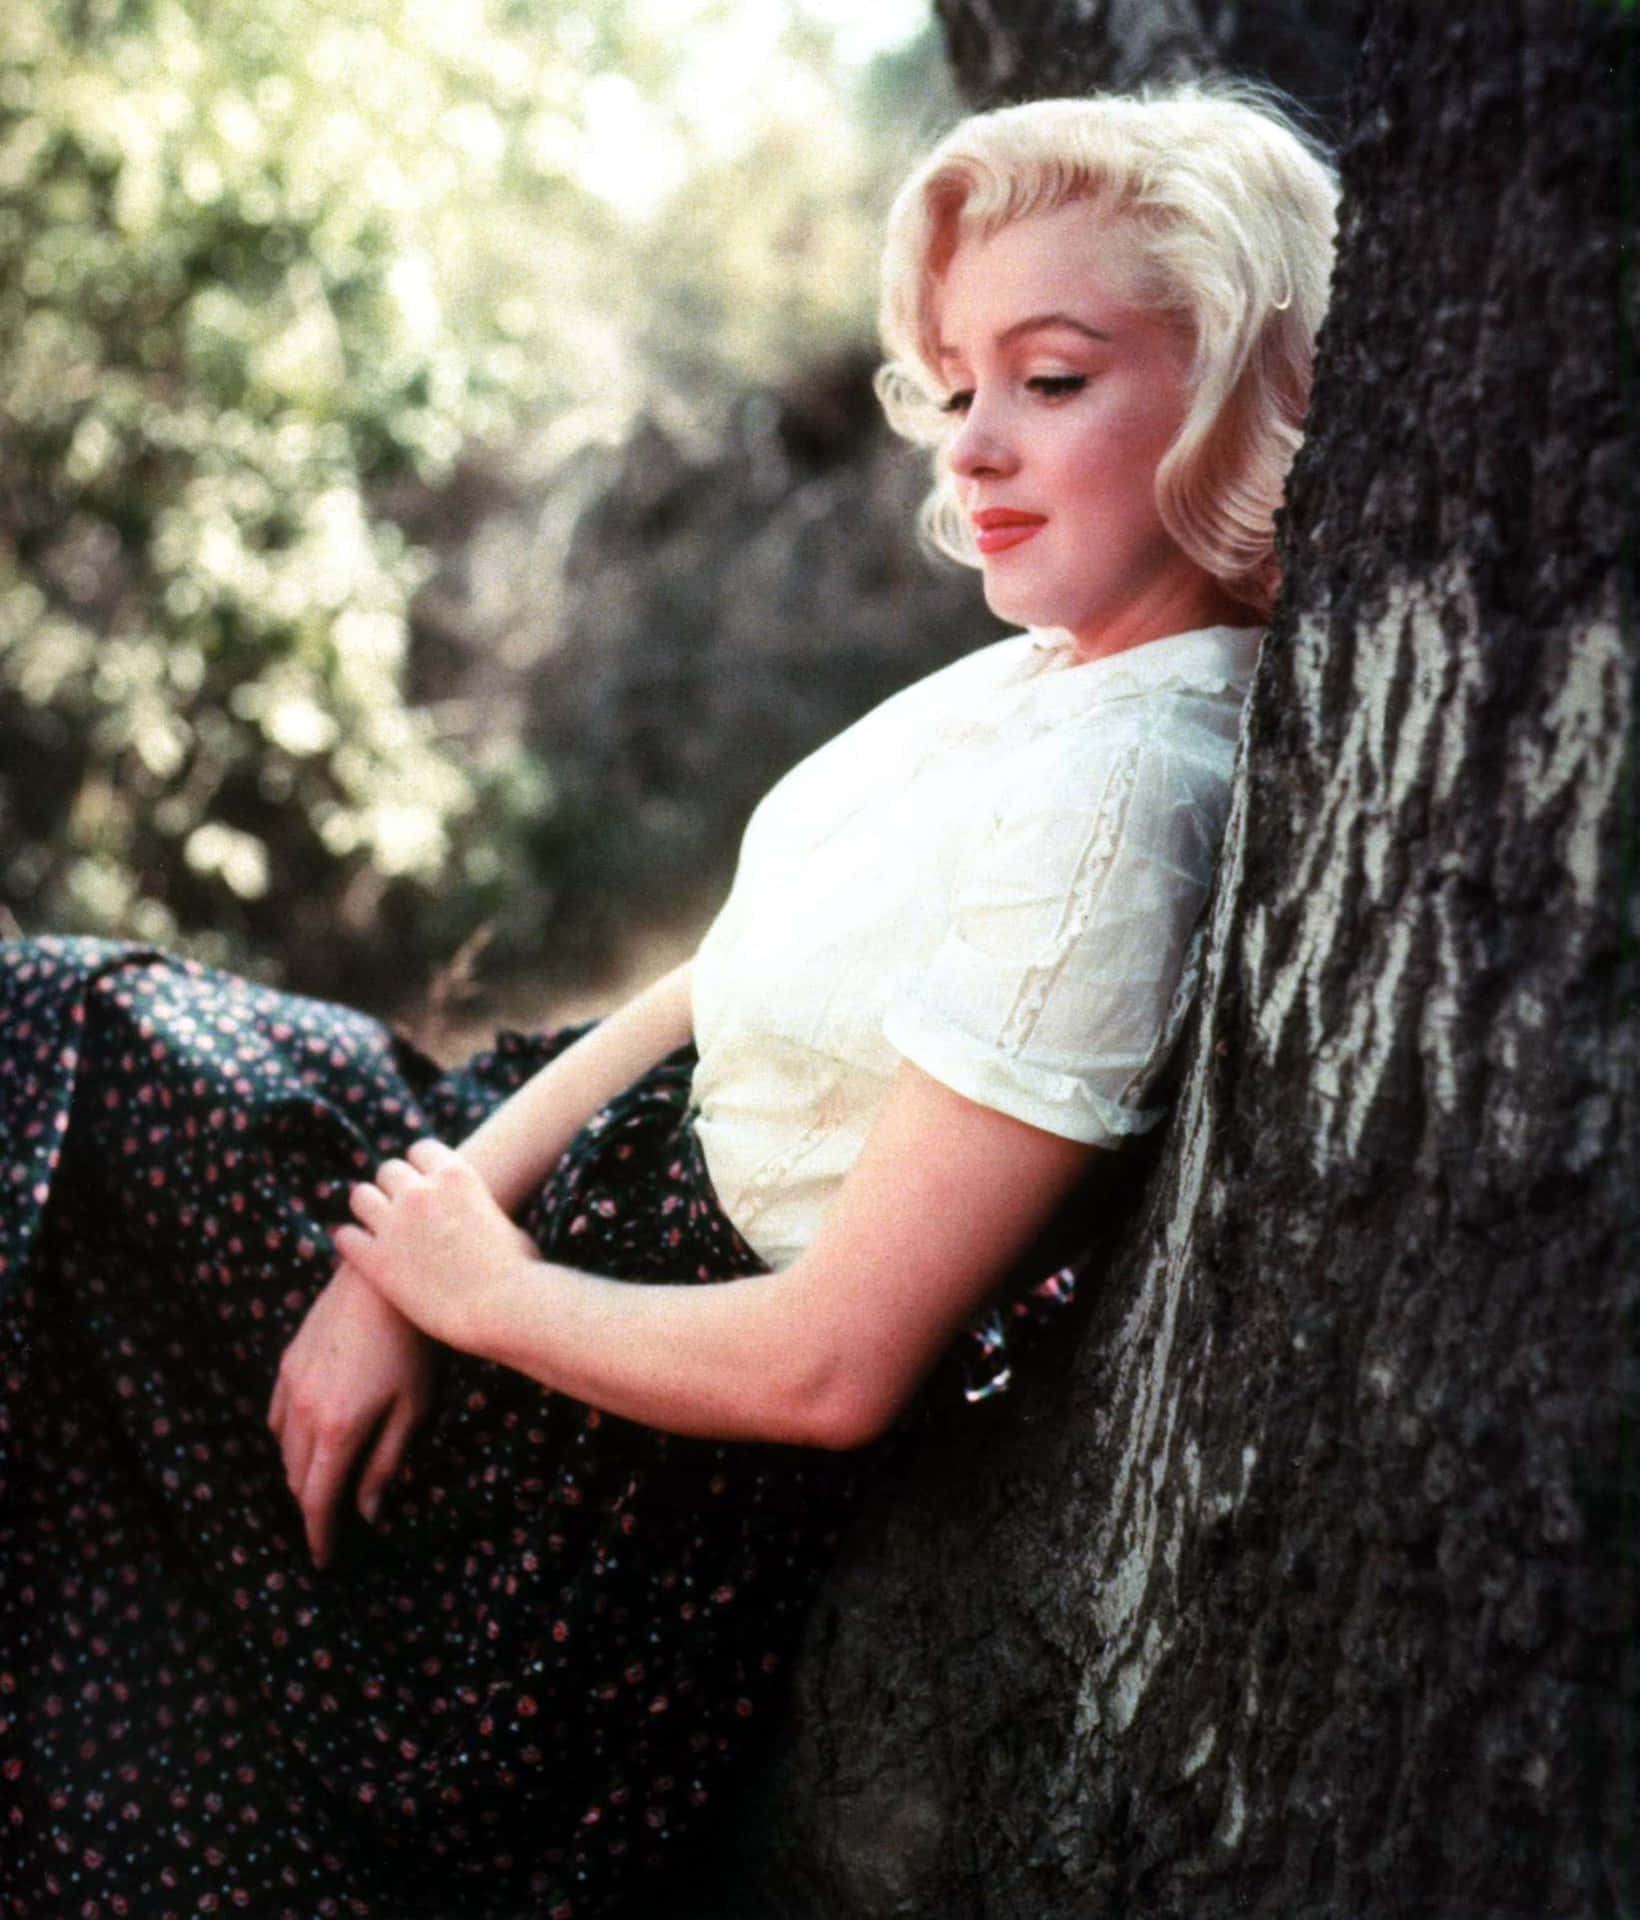 Iconic Marilyn Monroe in all her radiant glory